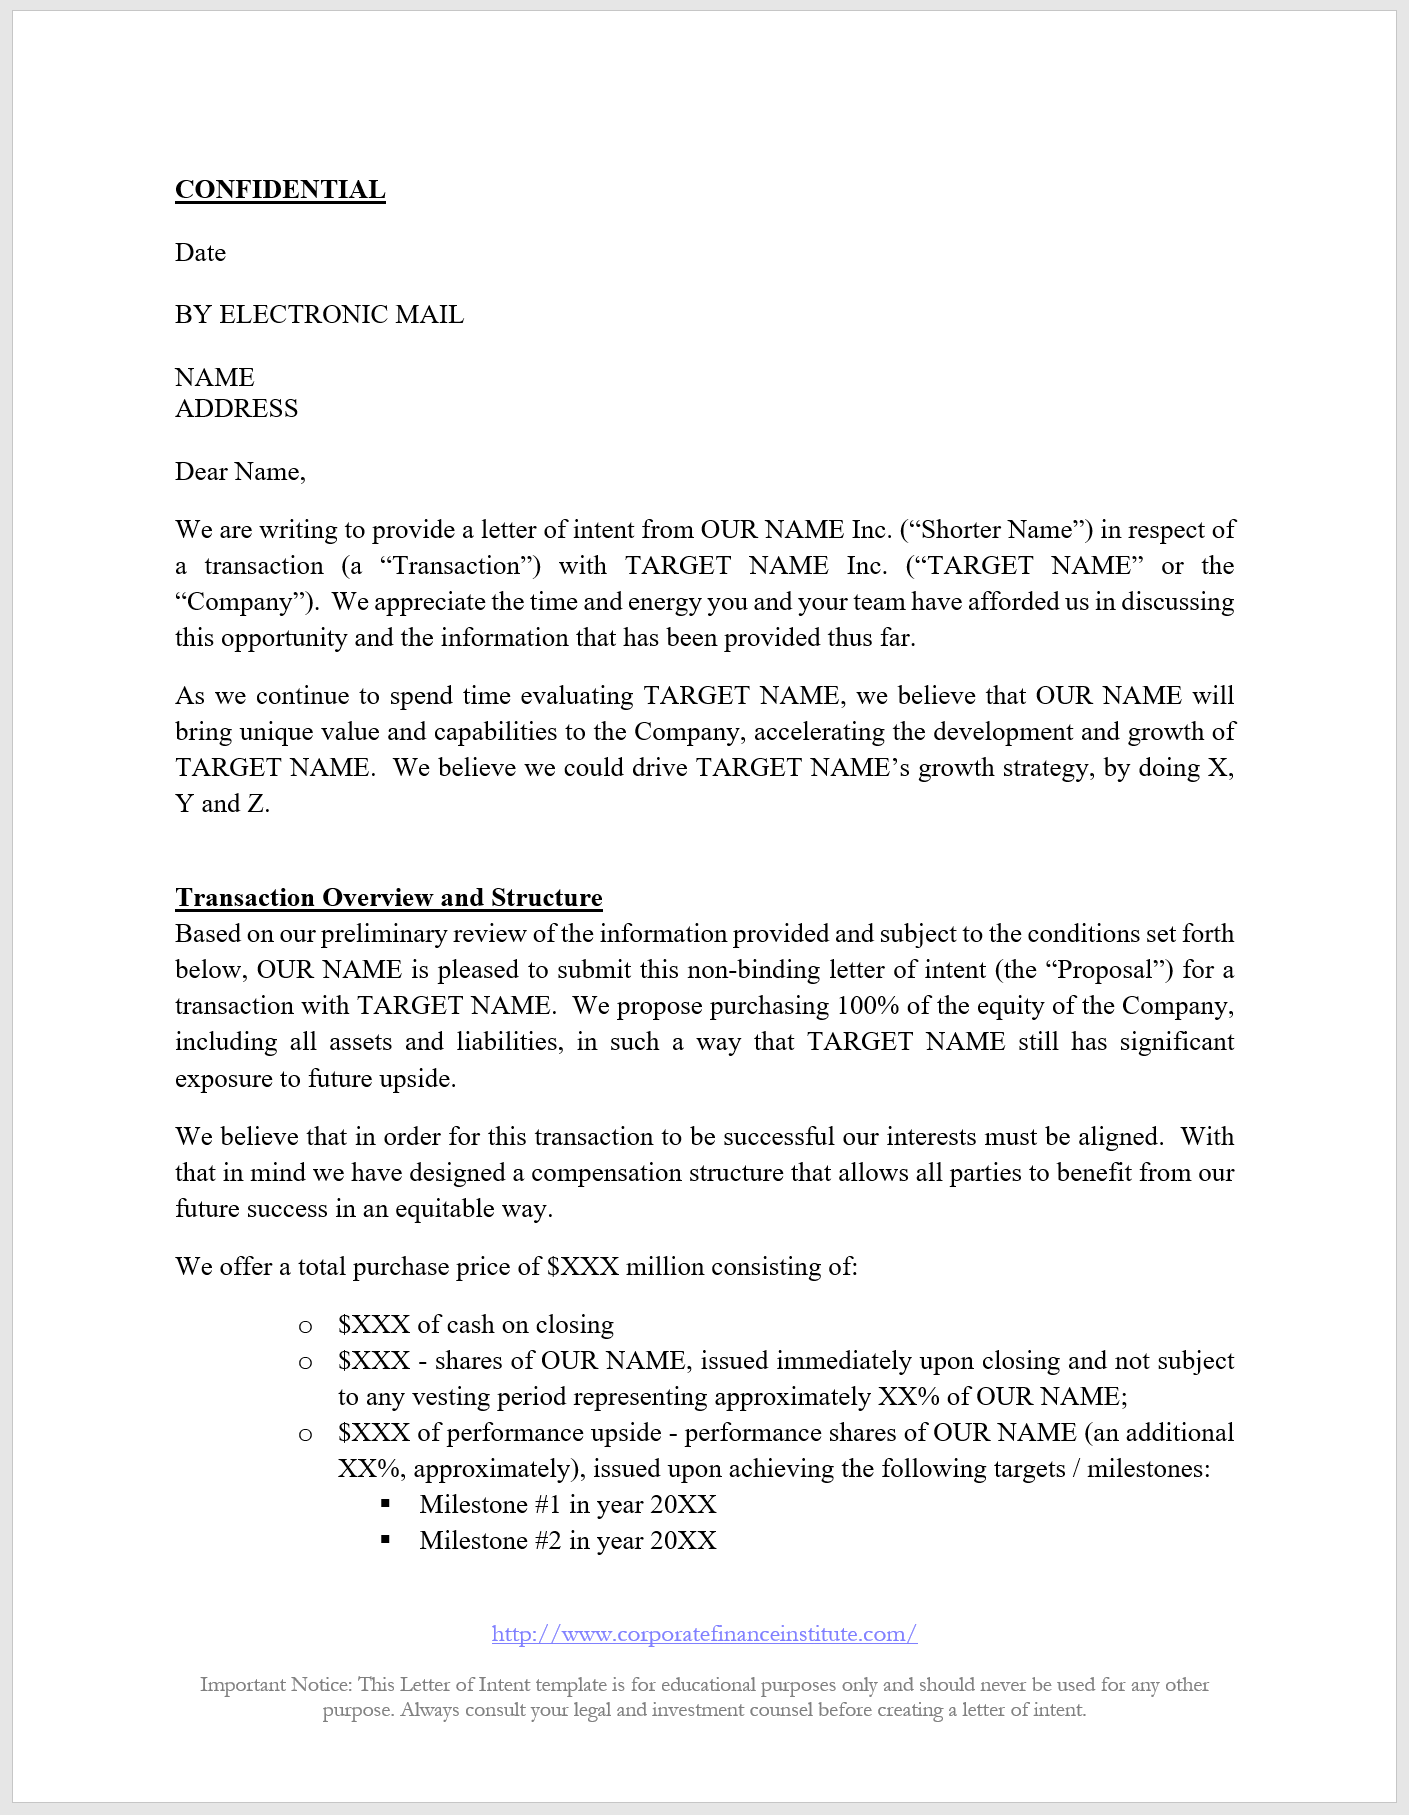 Commitment Letter Sample from corporatefinanceinstitute.com